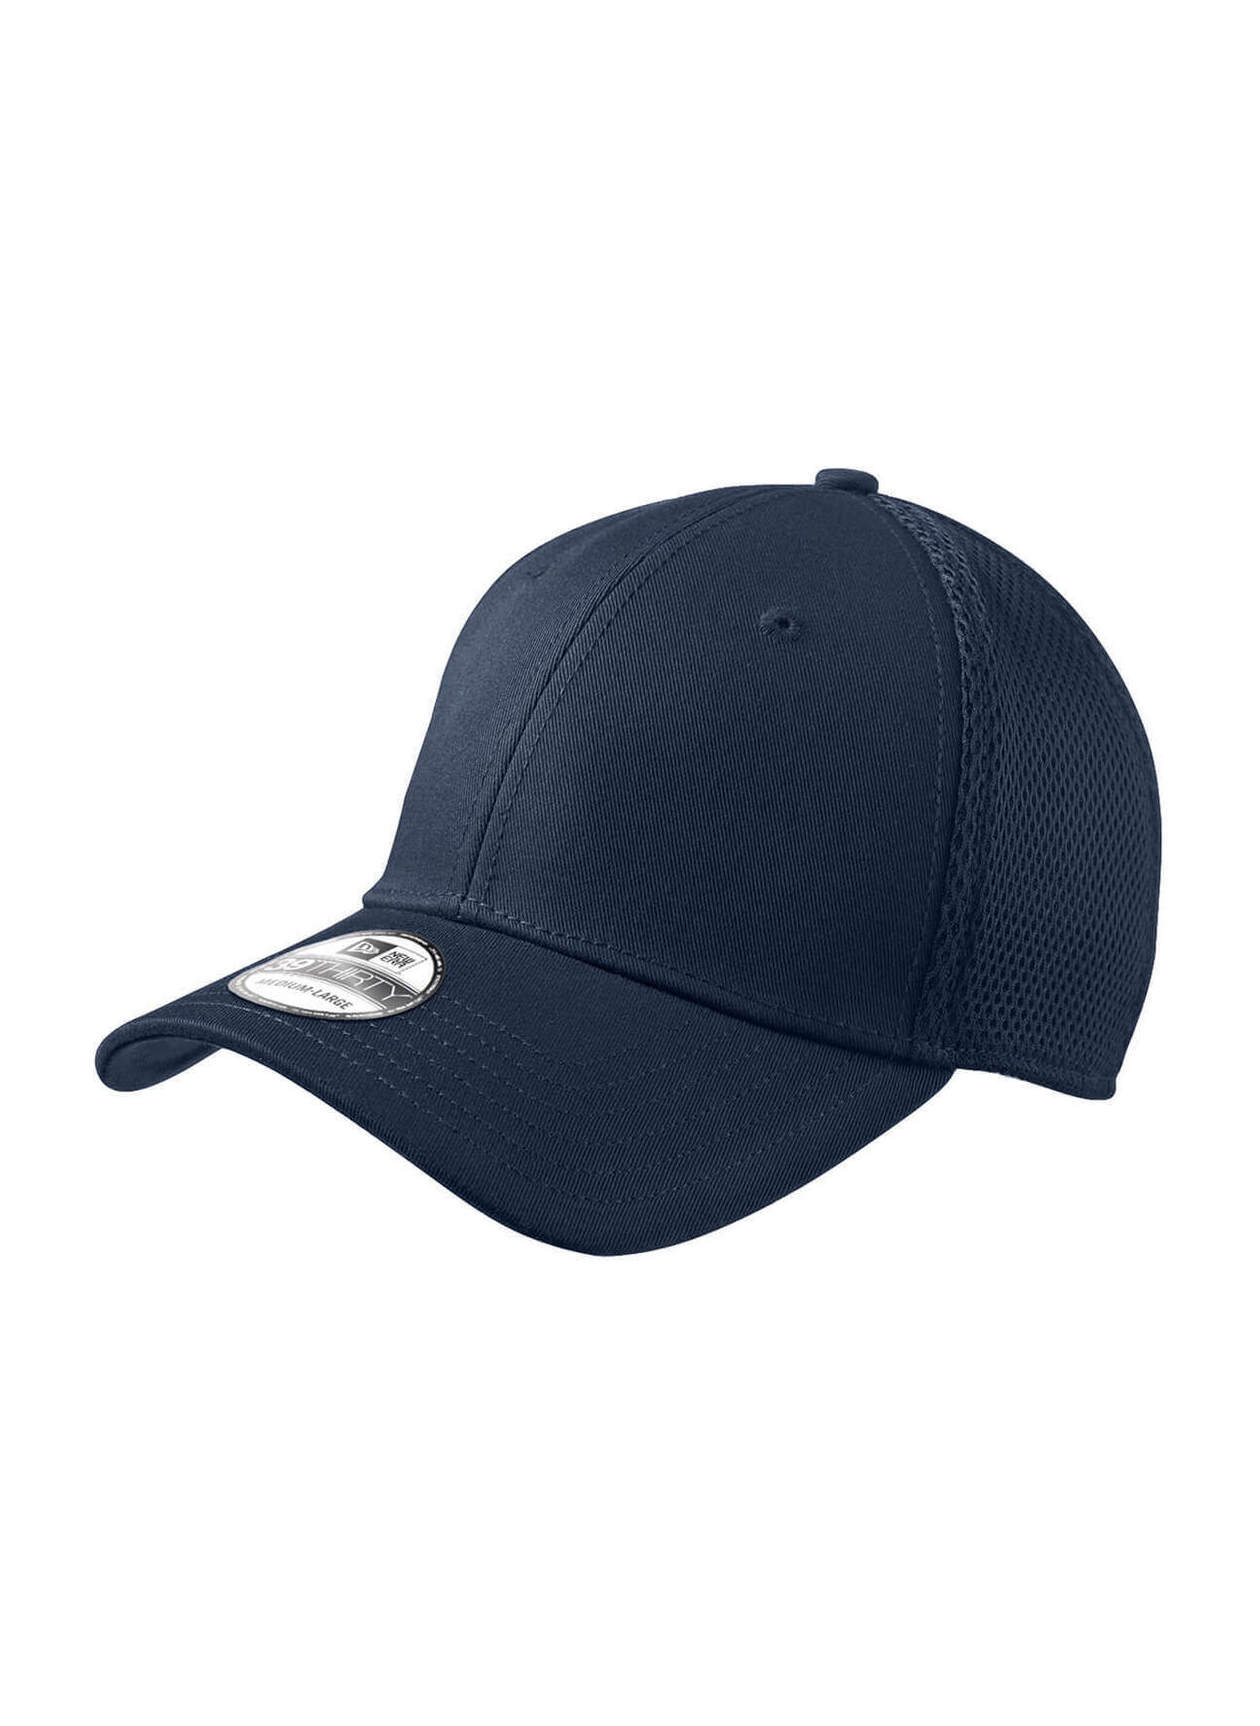 New Era Blank Custom 39THIRTY Stretch-Fitted Cap (BLK, S/M) at